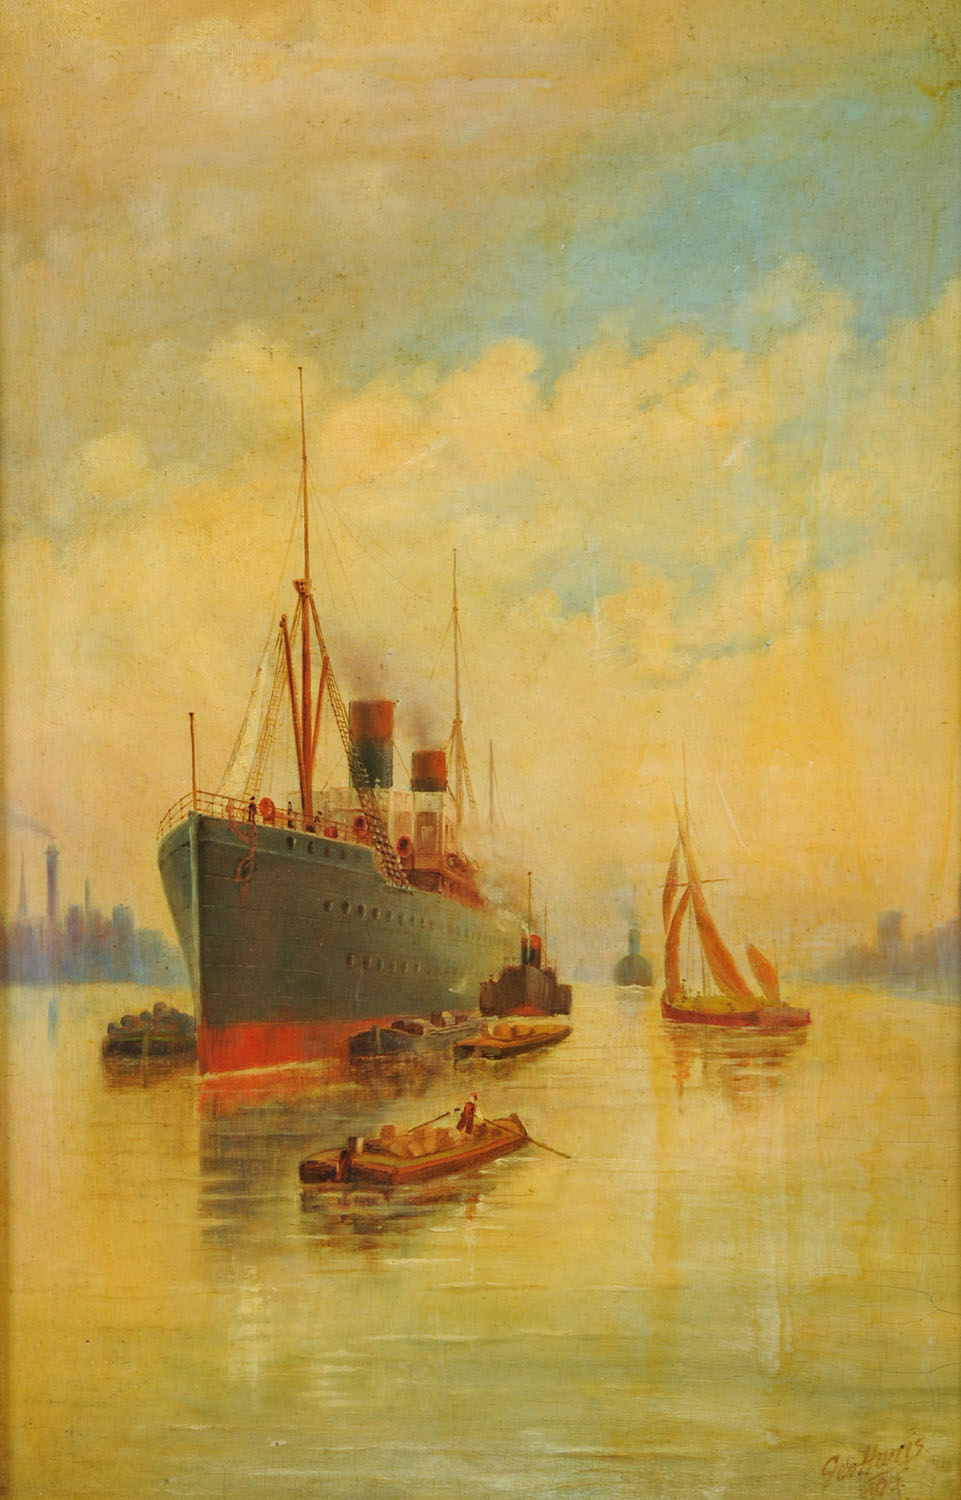 George Harris, oil painting on board, cruise liner in estuary.  17 ins x 11 ins, signed and dated